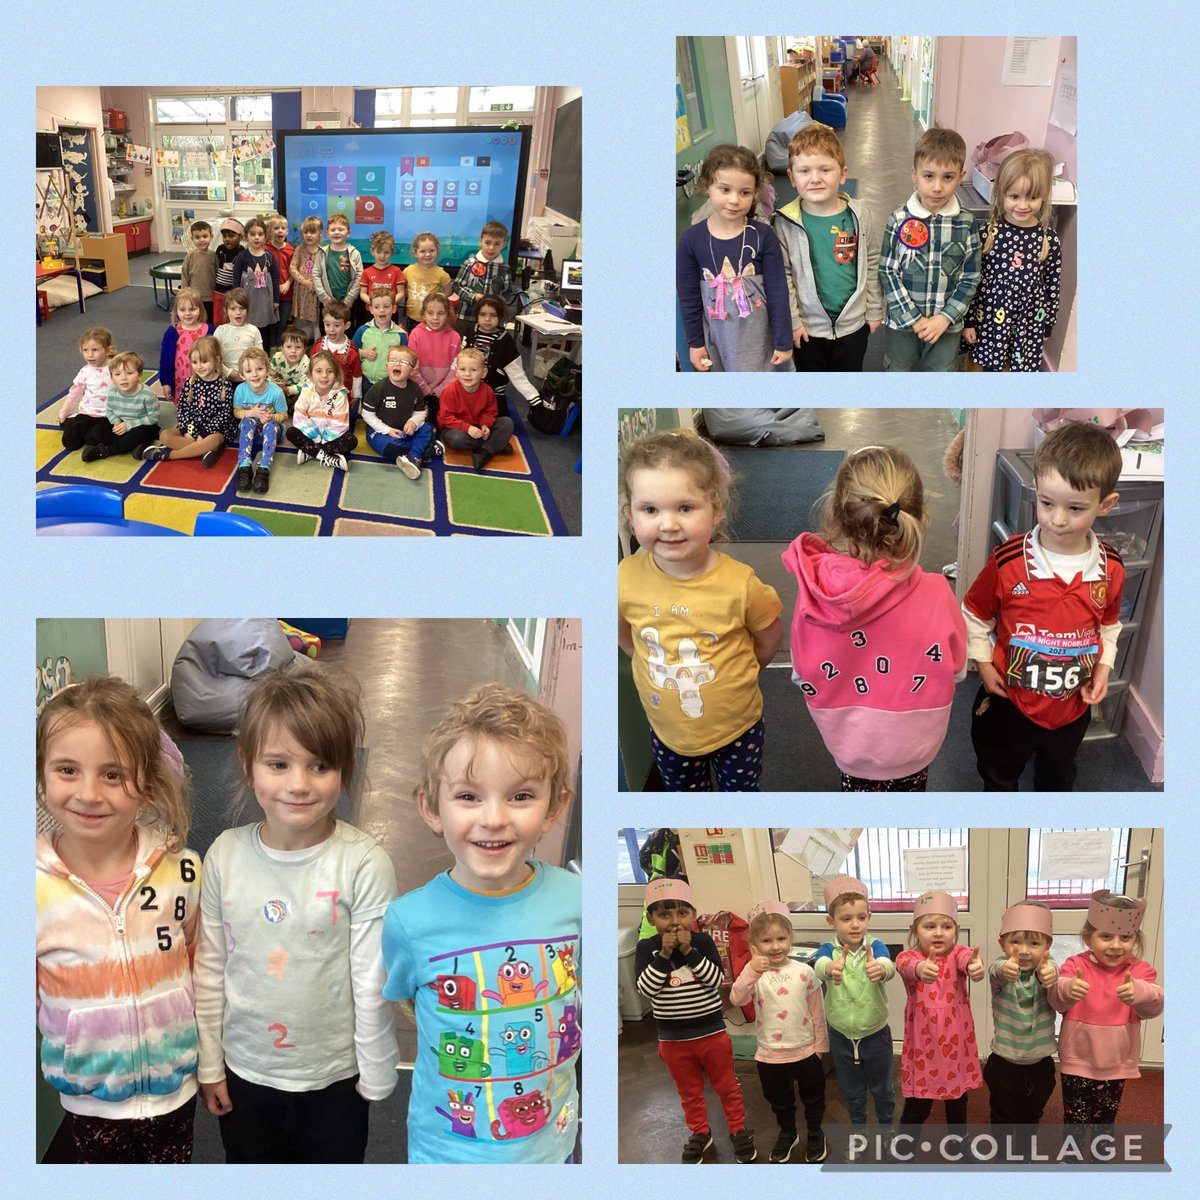 Rydyn ni codi arian am elusen @NSPCC We took part in #dressupfordigits day #NumberDay #CatholicSocialTeaching #commongood #supportingcharity #supportingothers